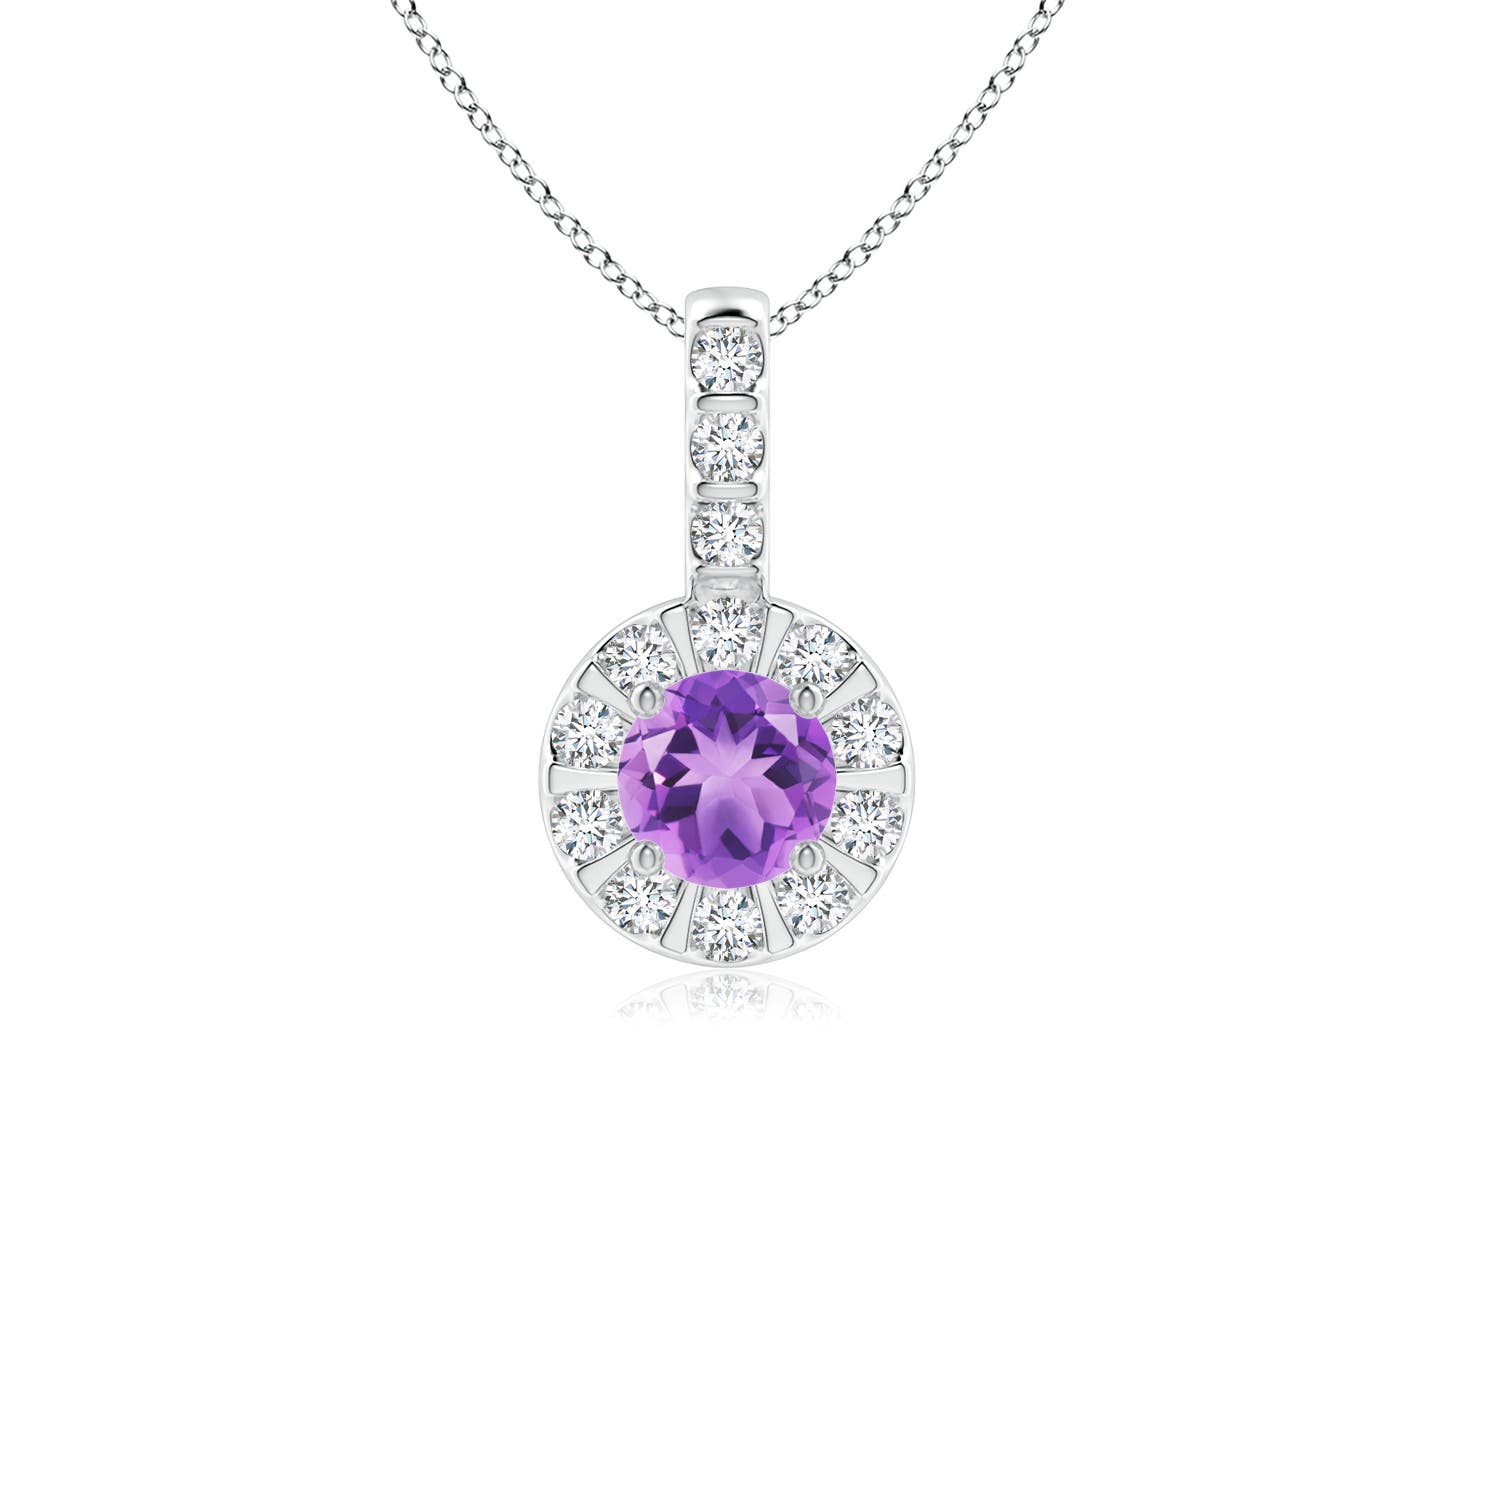 A - Amethyst / 0.38 CT / 14 KT White Gold